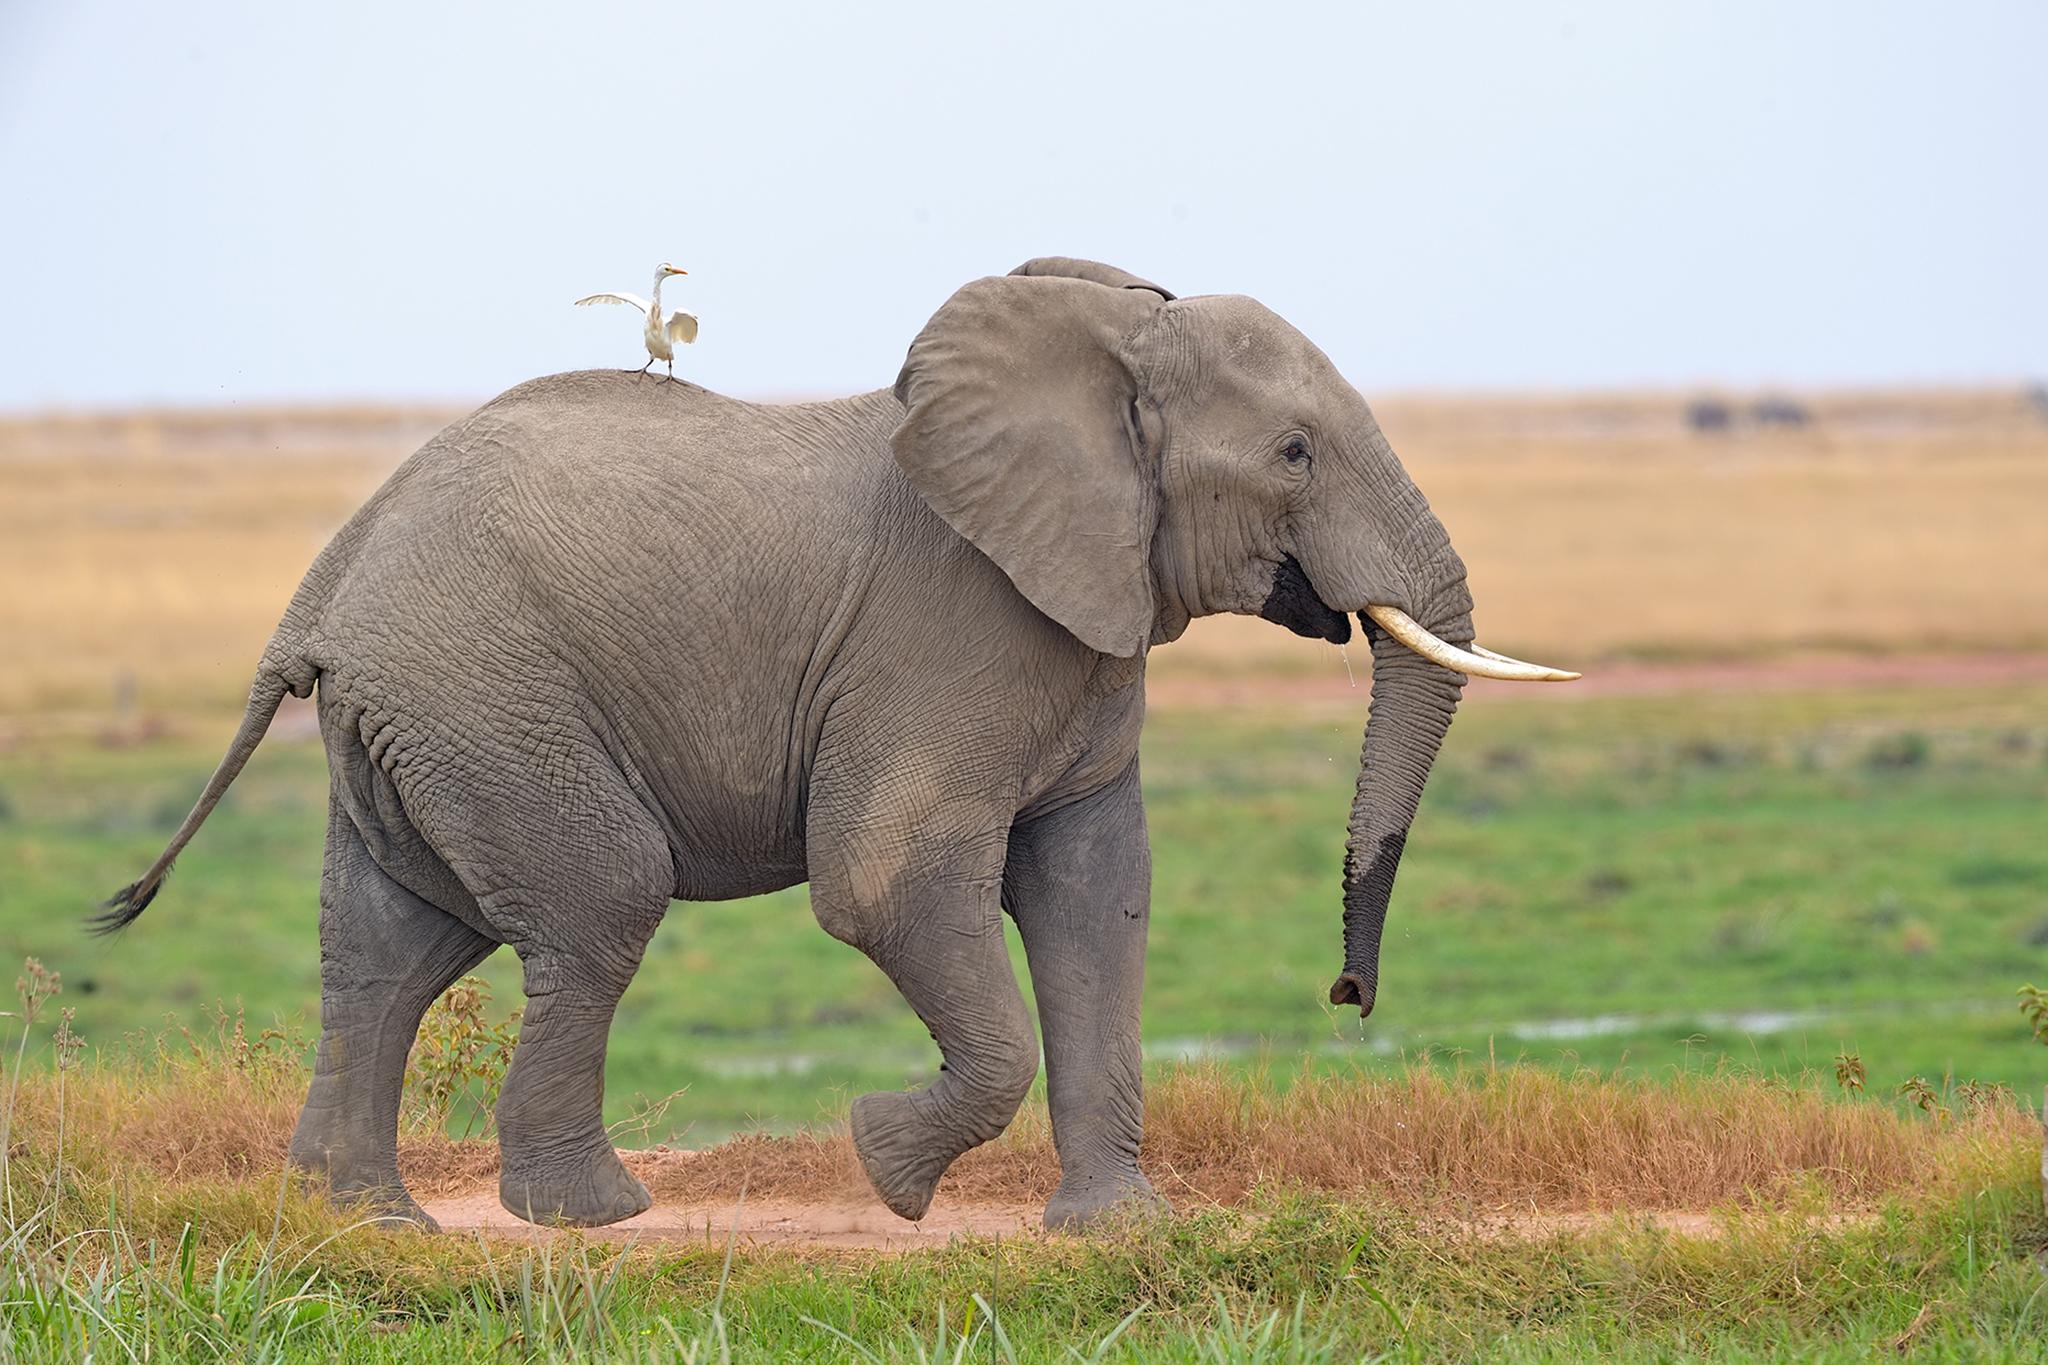 New research shows how elephants use their tusks and strength to help other elephants when they die (Adwait Aphale)